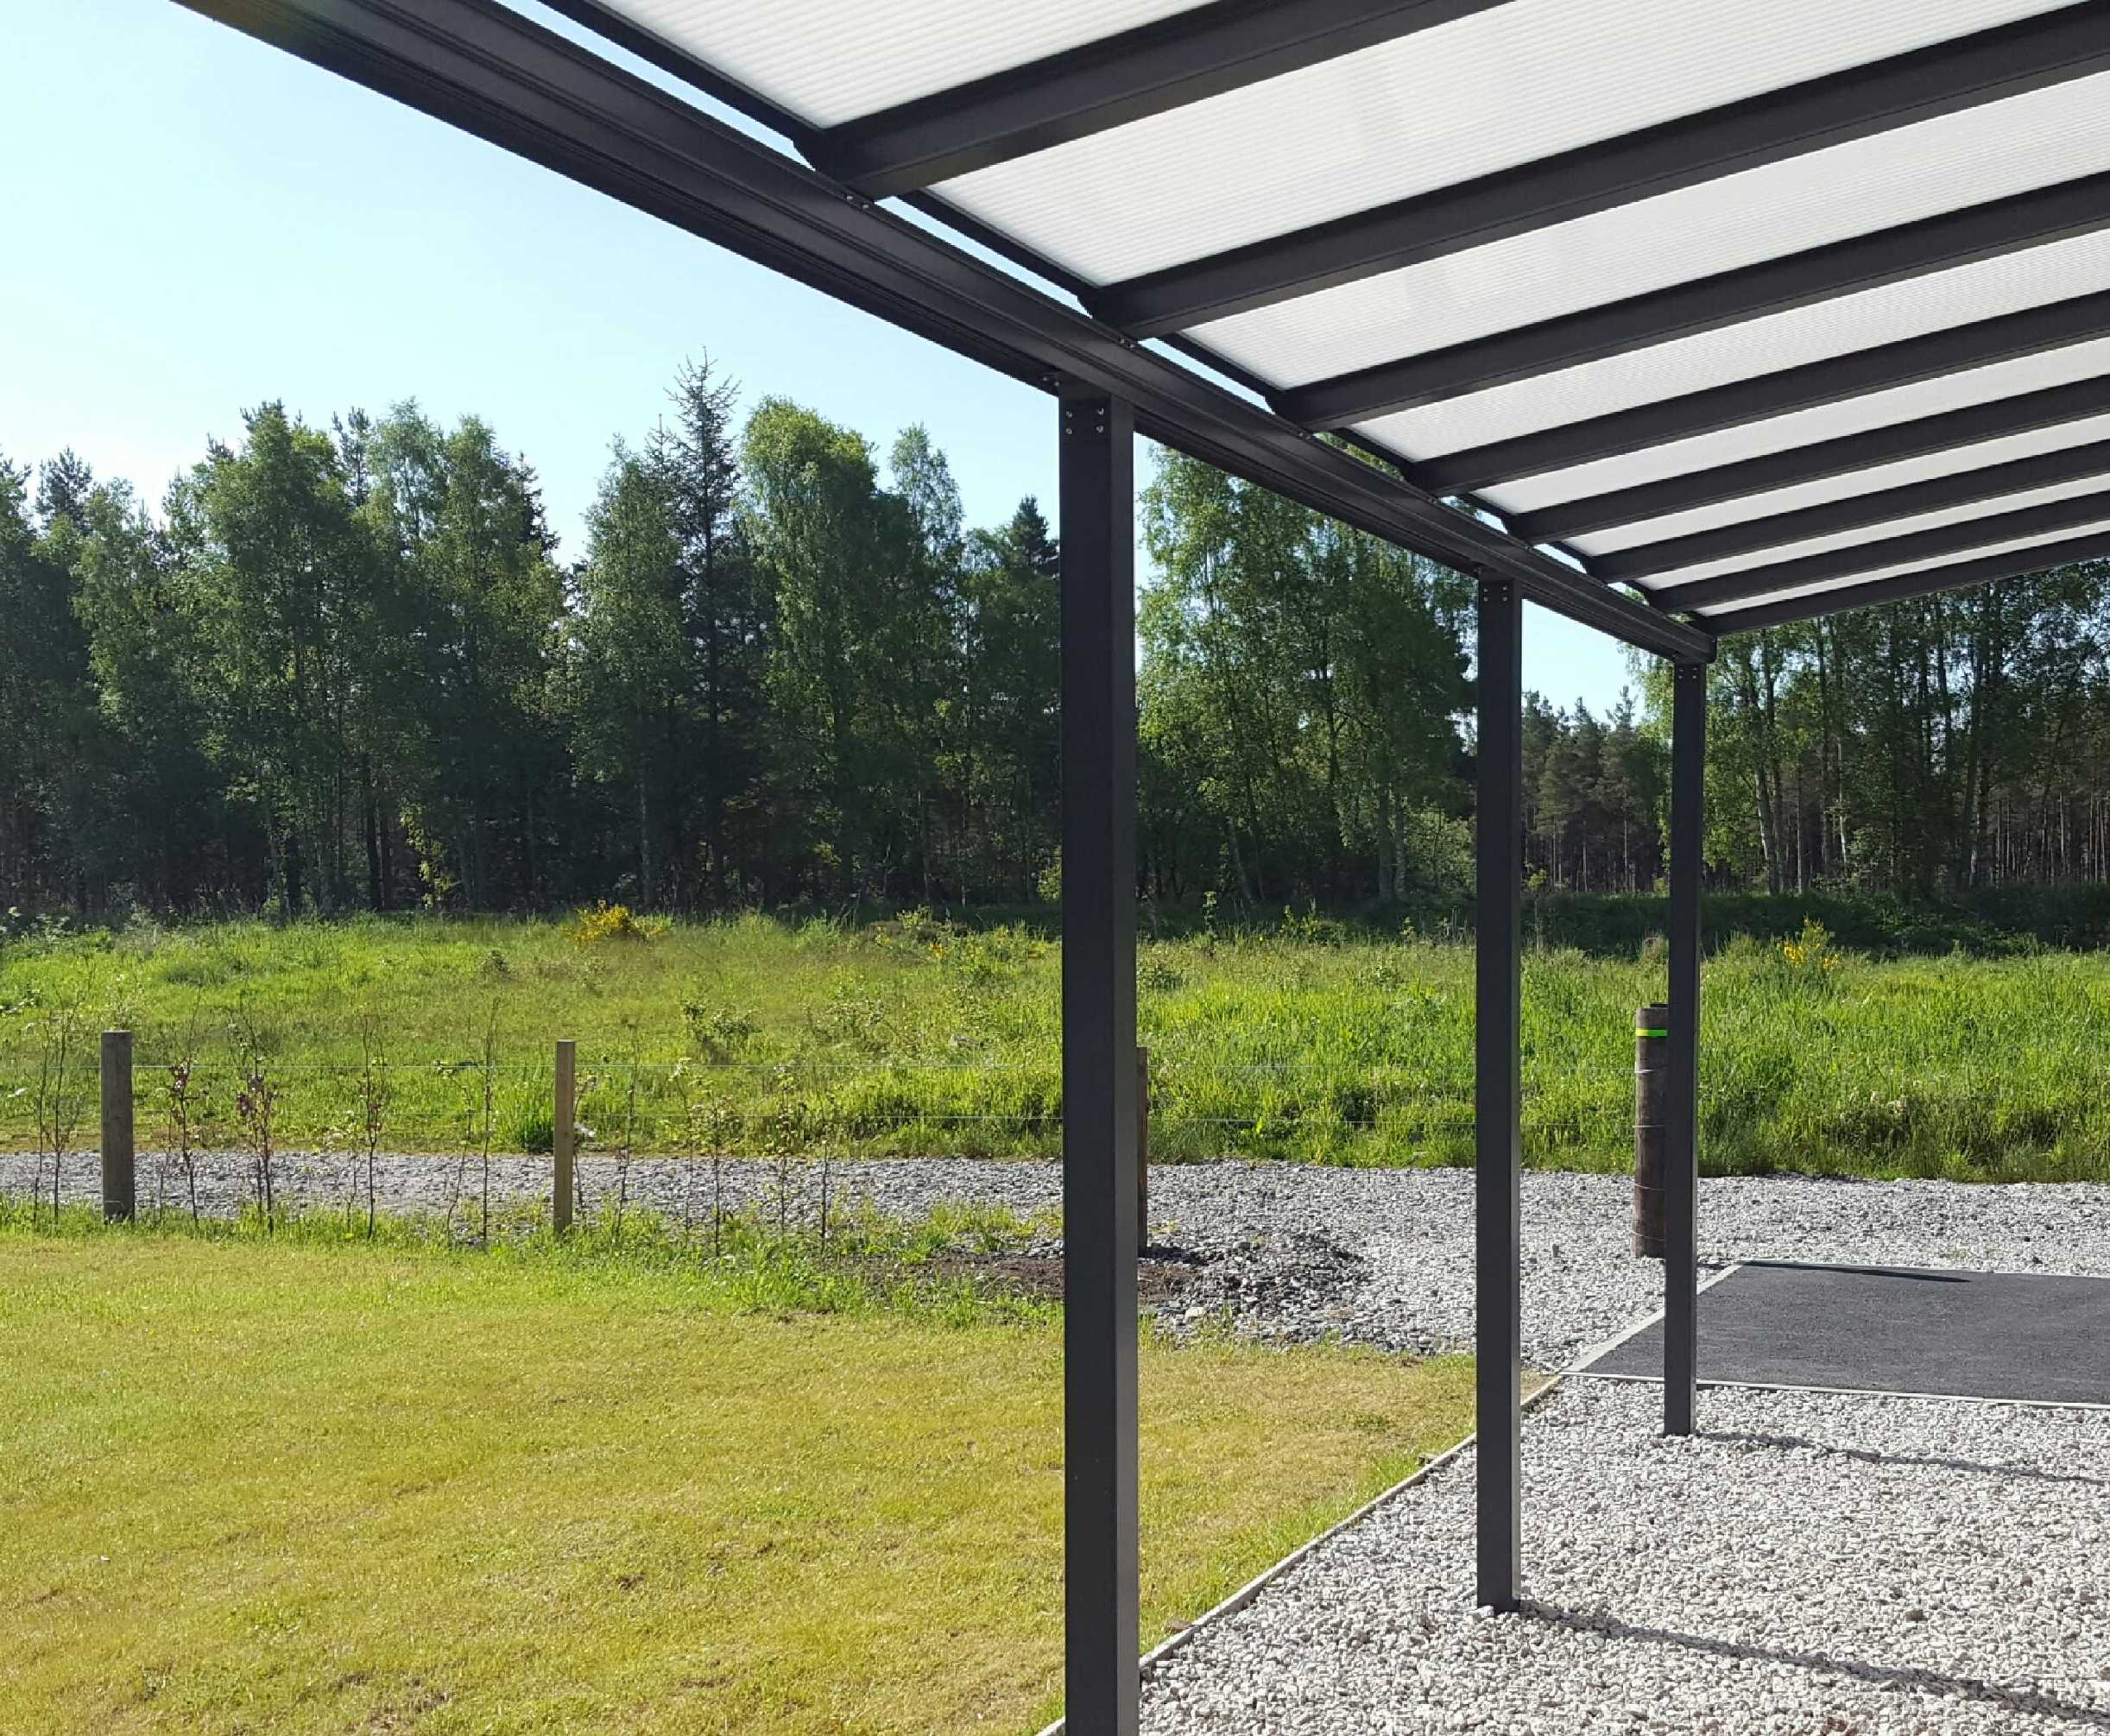 Omega Smart Lean-To Canopy, Anthracite Grey, 6mm Glass Clear Plate Polycarbonate Glazing - 4.9m (W) x 3.0m (P), (3) Supporting Posts